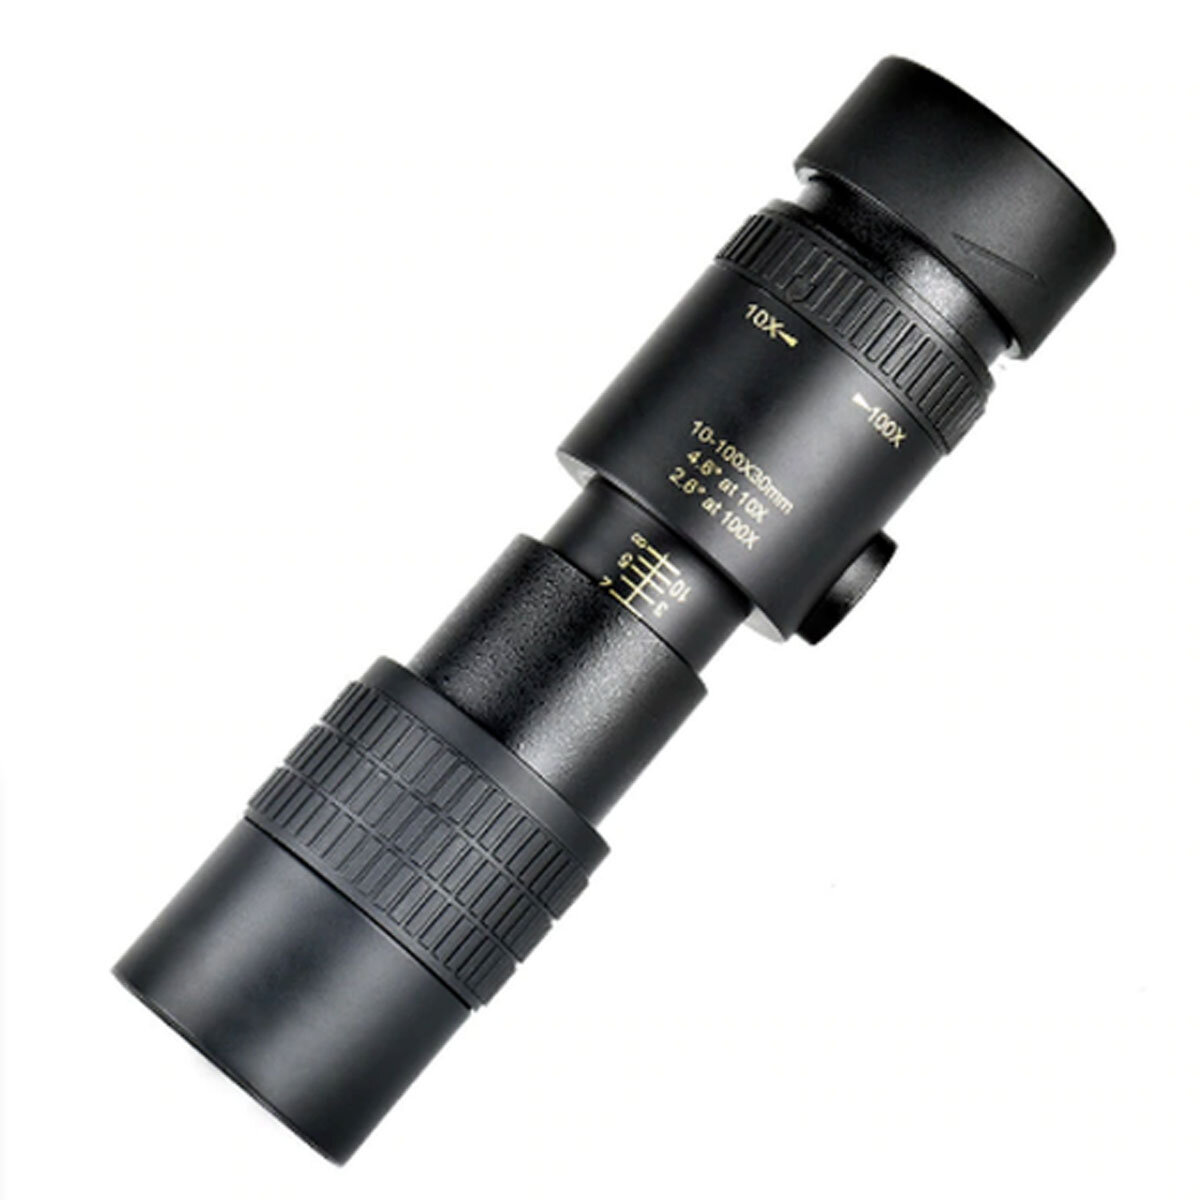 4K 10-300X40mm Super Telephoto Zoom Lens Monocular Telescope High Power HD Metal Telescope with Tripod for Mobile Phone Photography